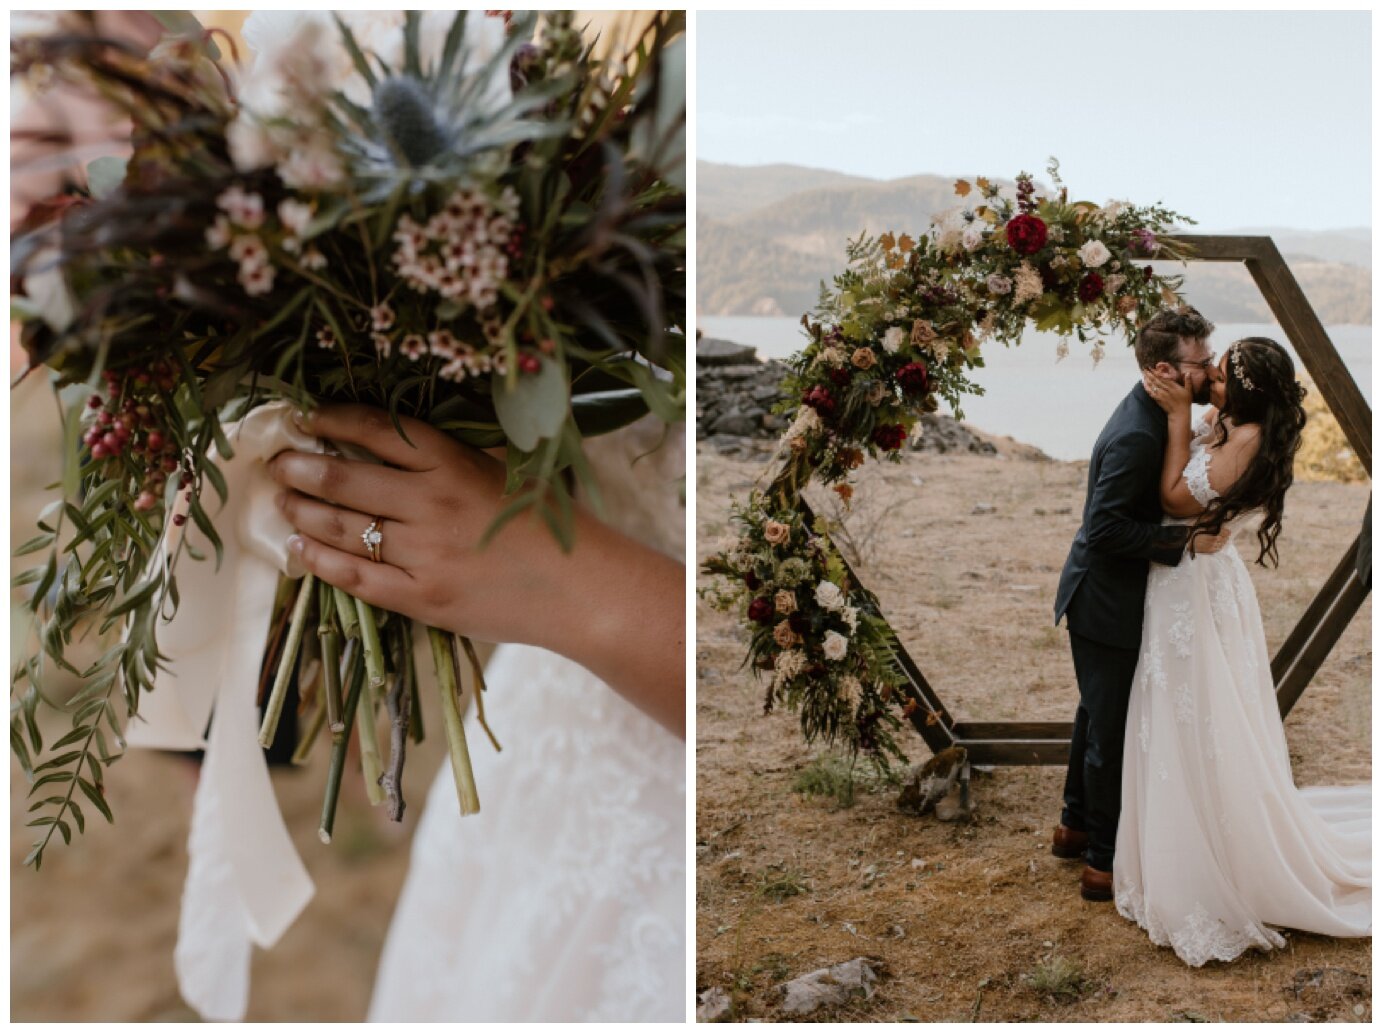 Elopement at Government Cove Peninsula - Madeline Rose Photography - PNW Elopement Photographer_0012.jpg